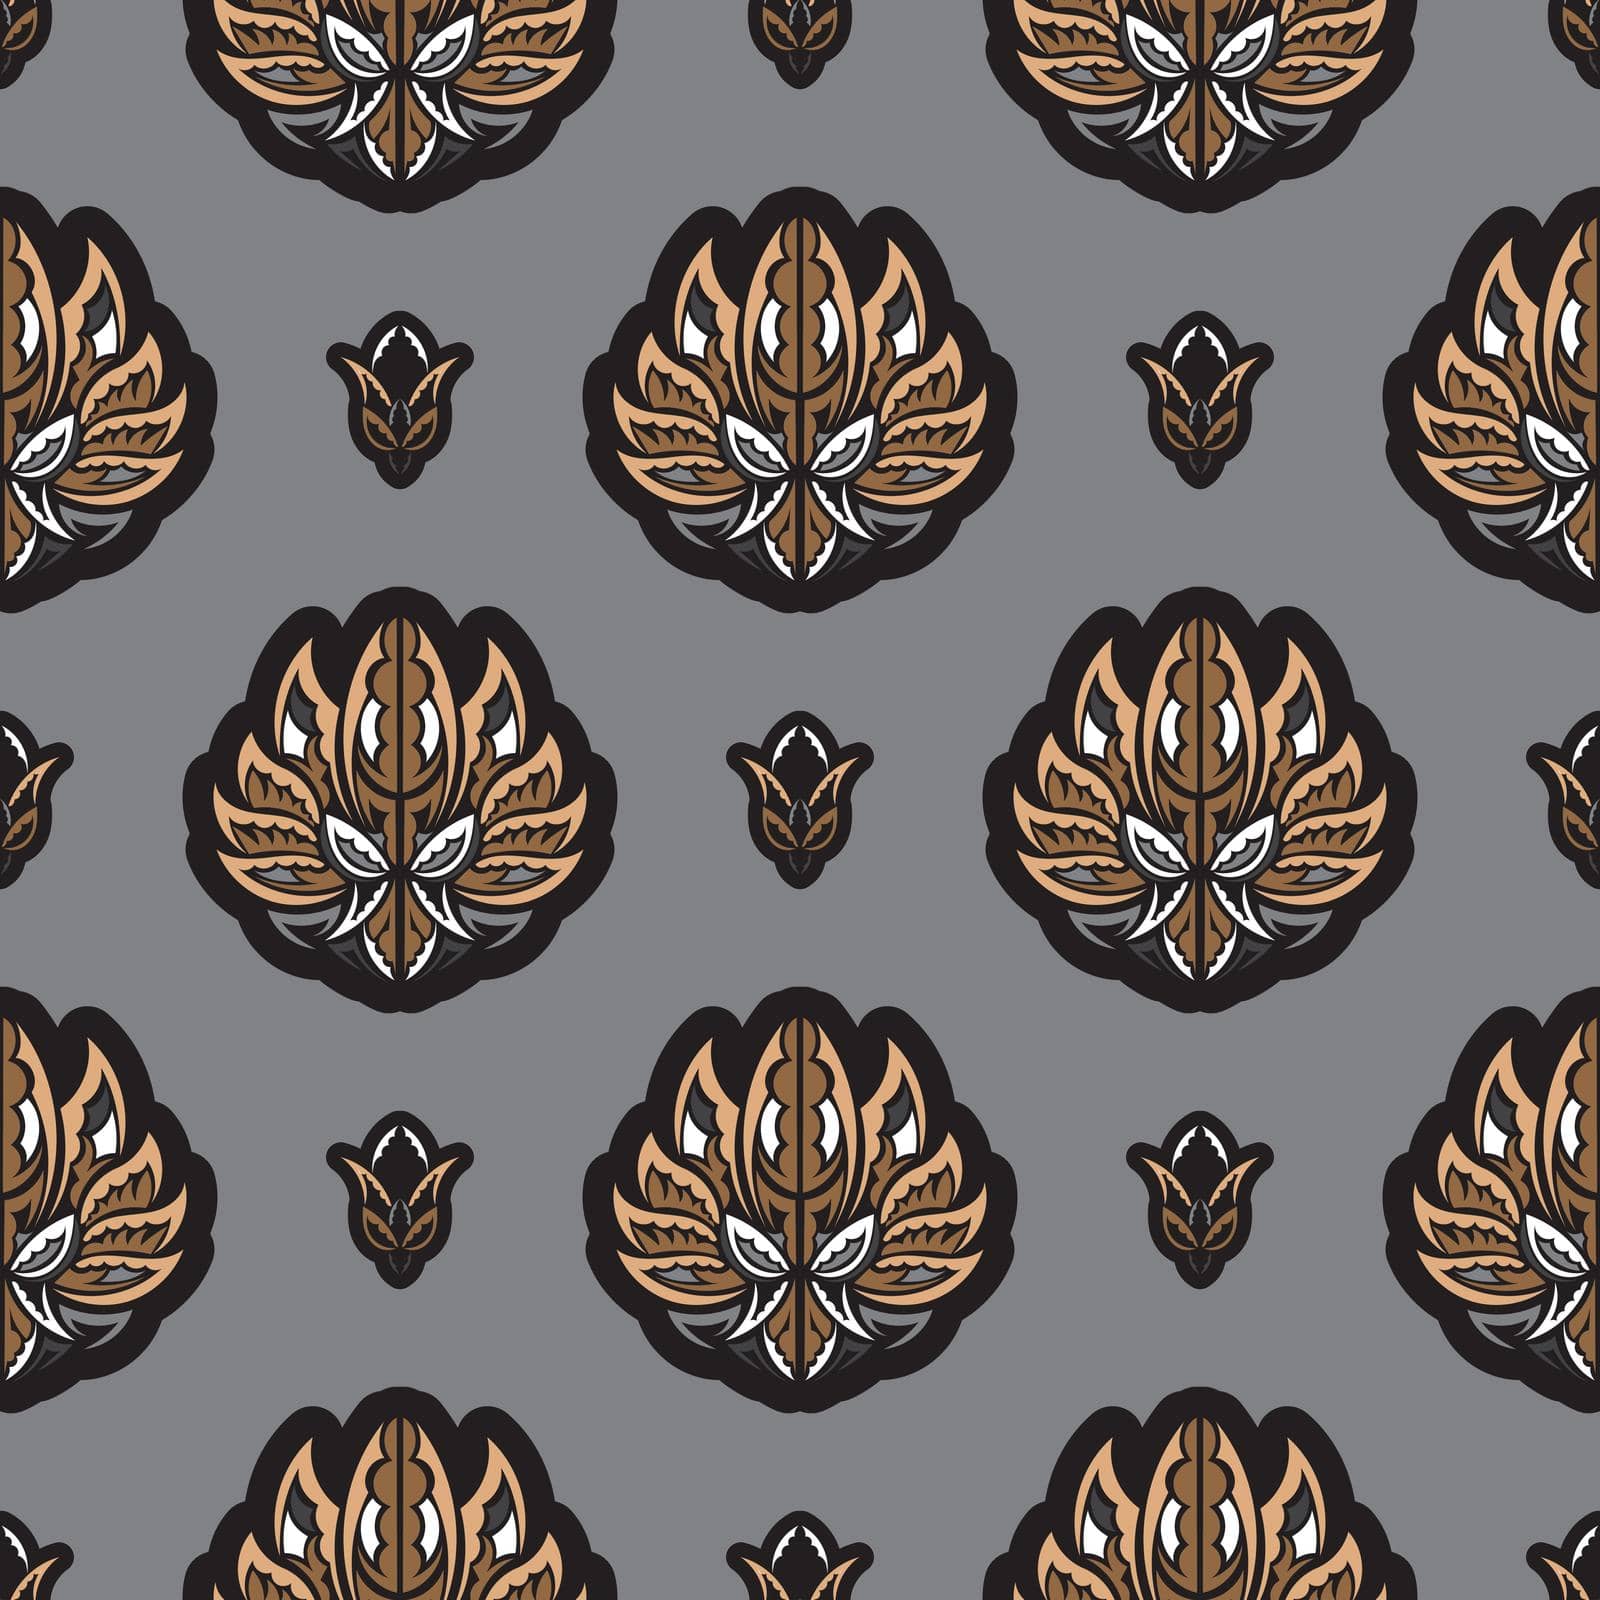 Seamless pattern with lotuses. Expensive and luxurious style. Good for menus, postcards, wallpaper and fabric. Vector illustration.